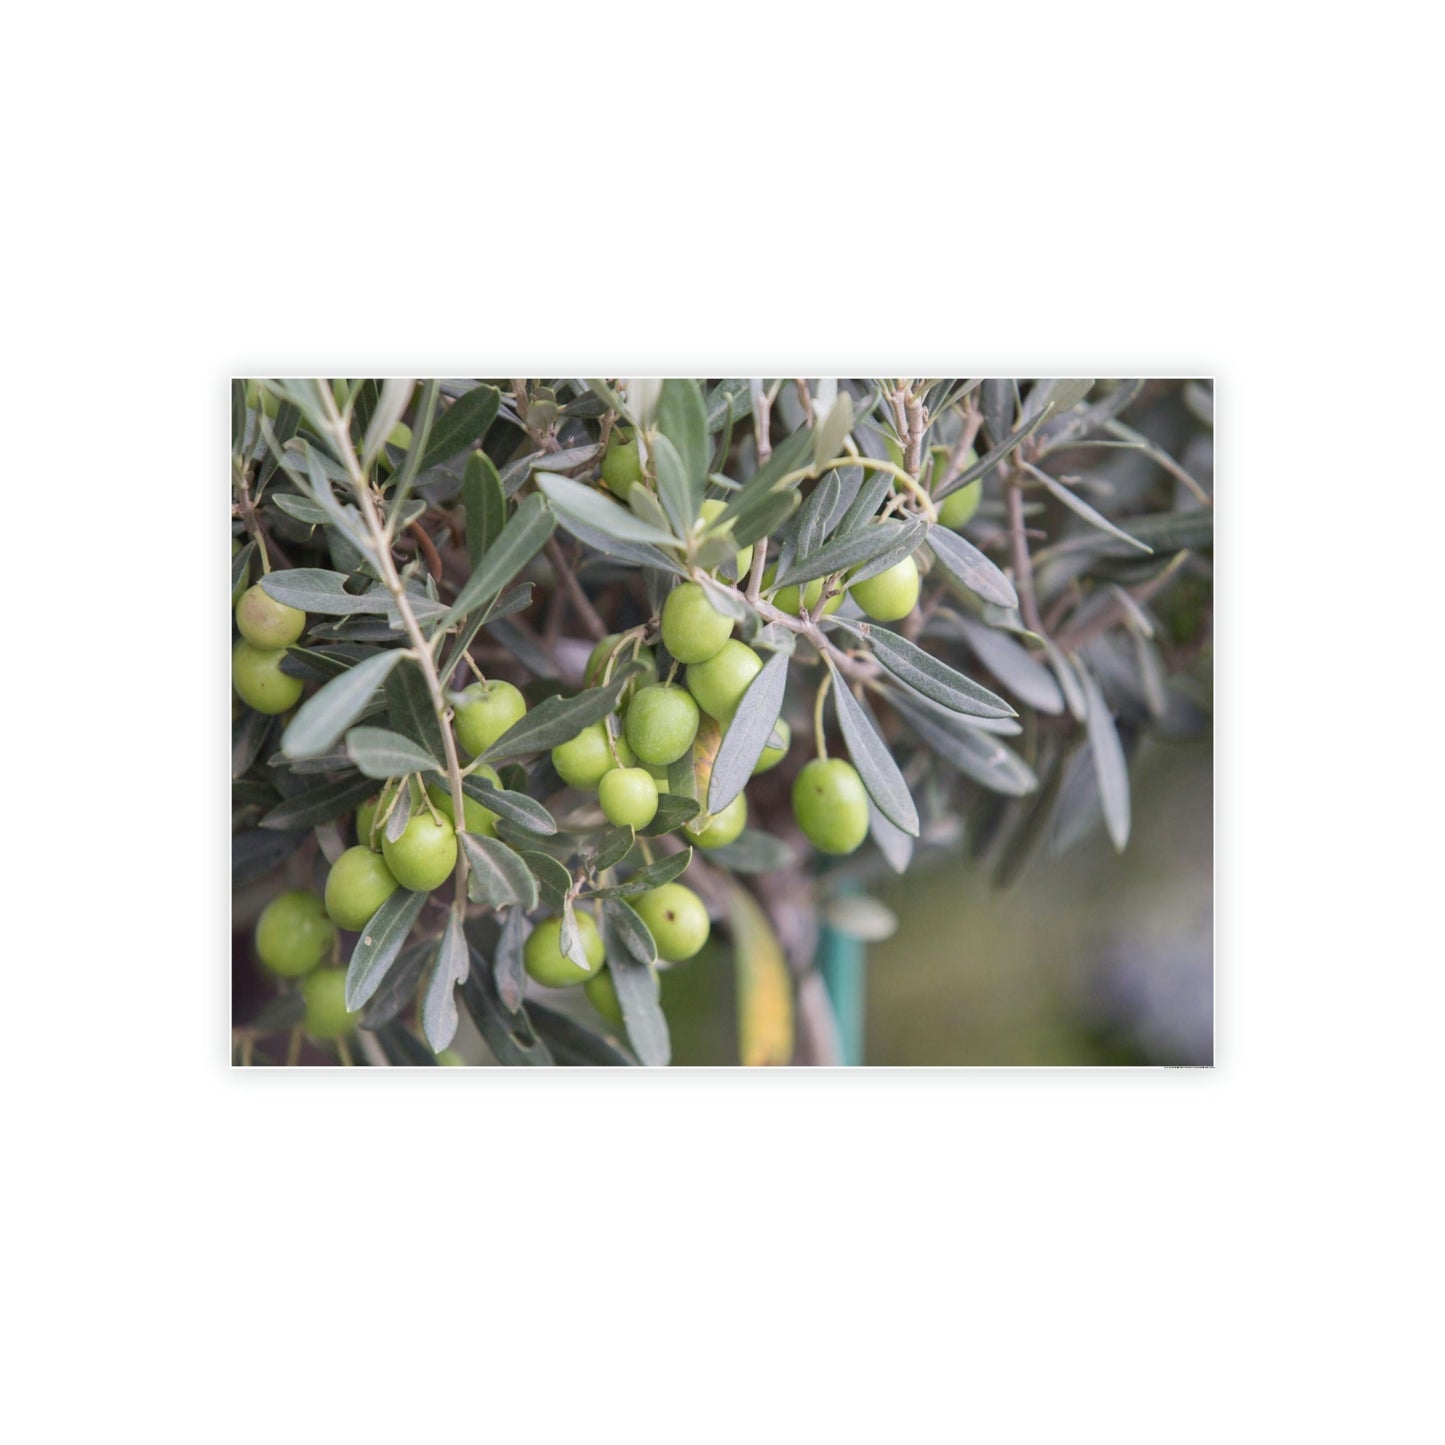 A Grove of Memories: A Nostalgic and Heartfelt Tribute to the Olive Trees' History